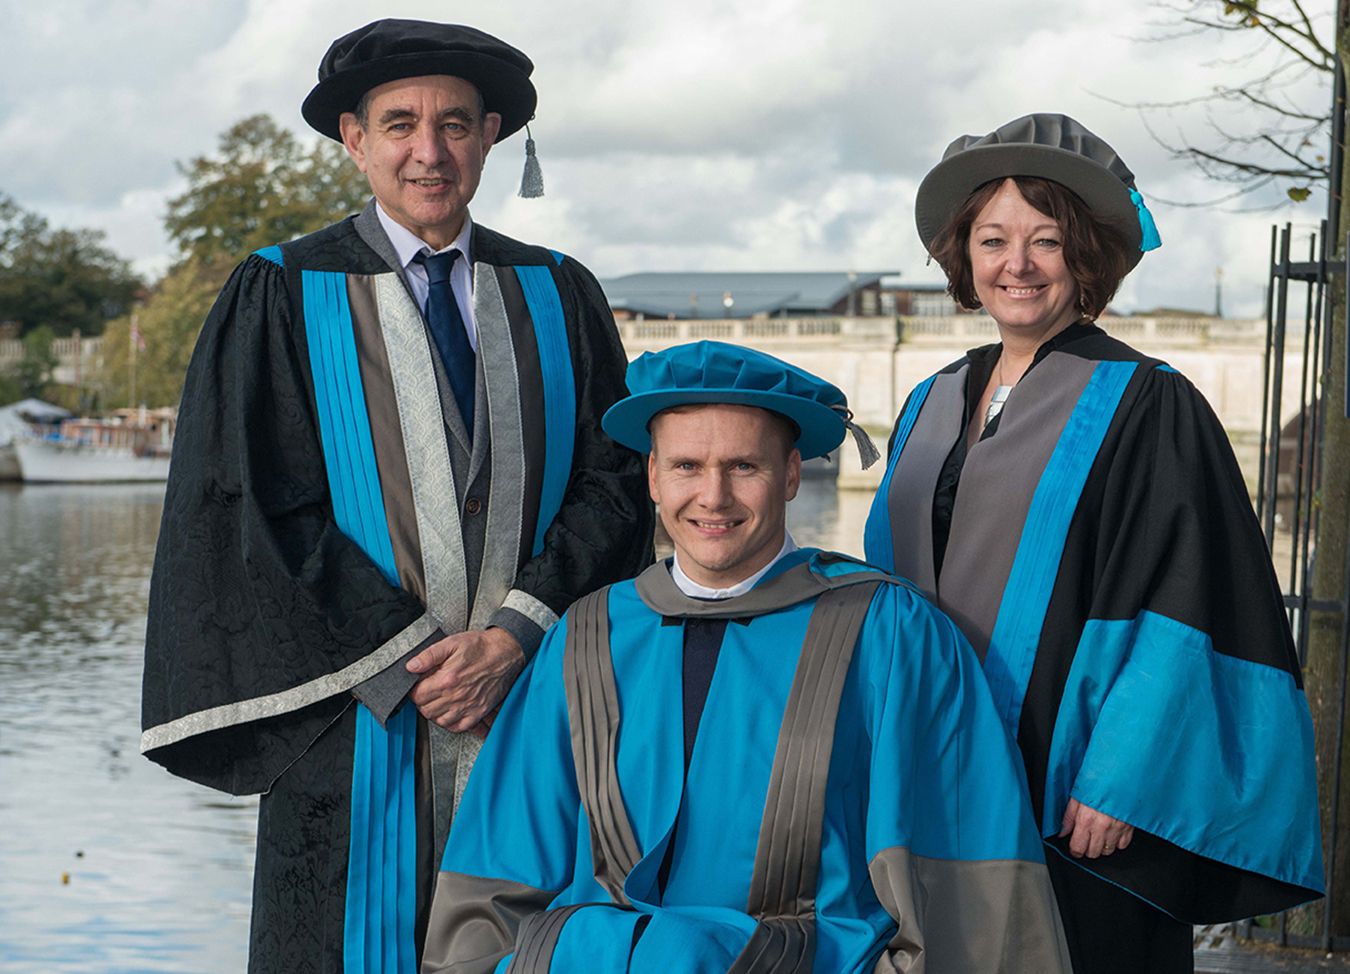 Kingston University Vice-Chancellor Professor Julius Weinberg, left, and interim Dean for the Faculty of Science, Engineering and Computing Dr Lucy Jones applauded honorary degree recipient David Weir for being an inspirational ambassador for disabled sports. 